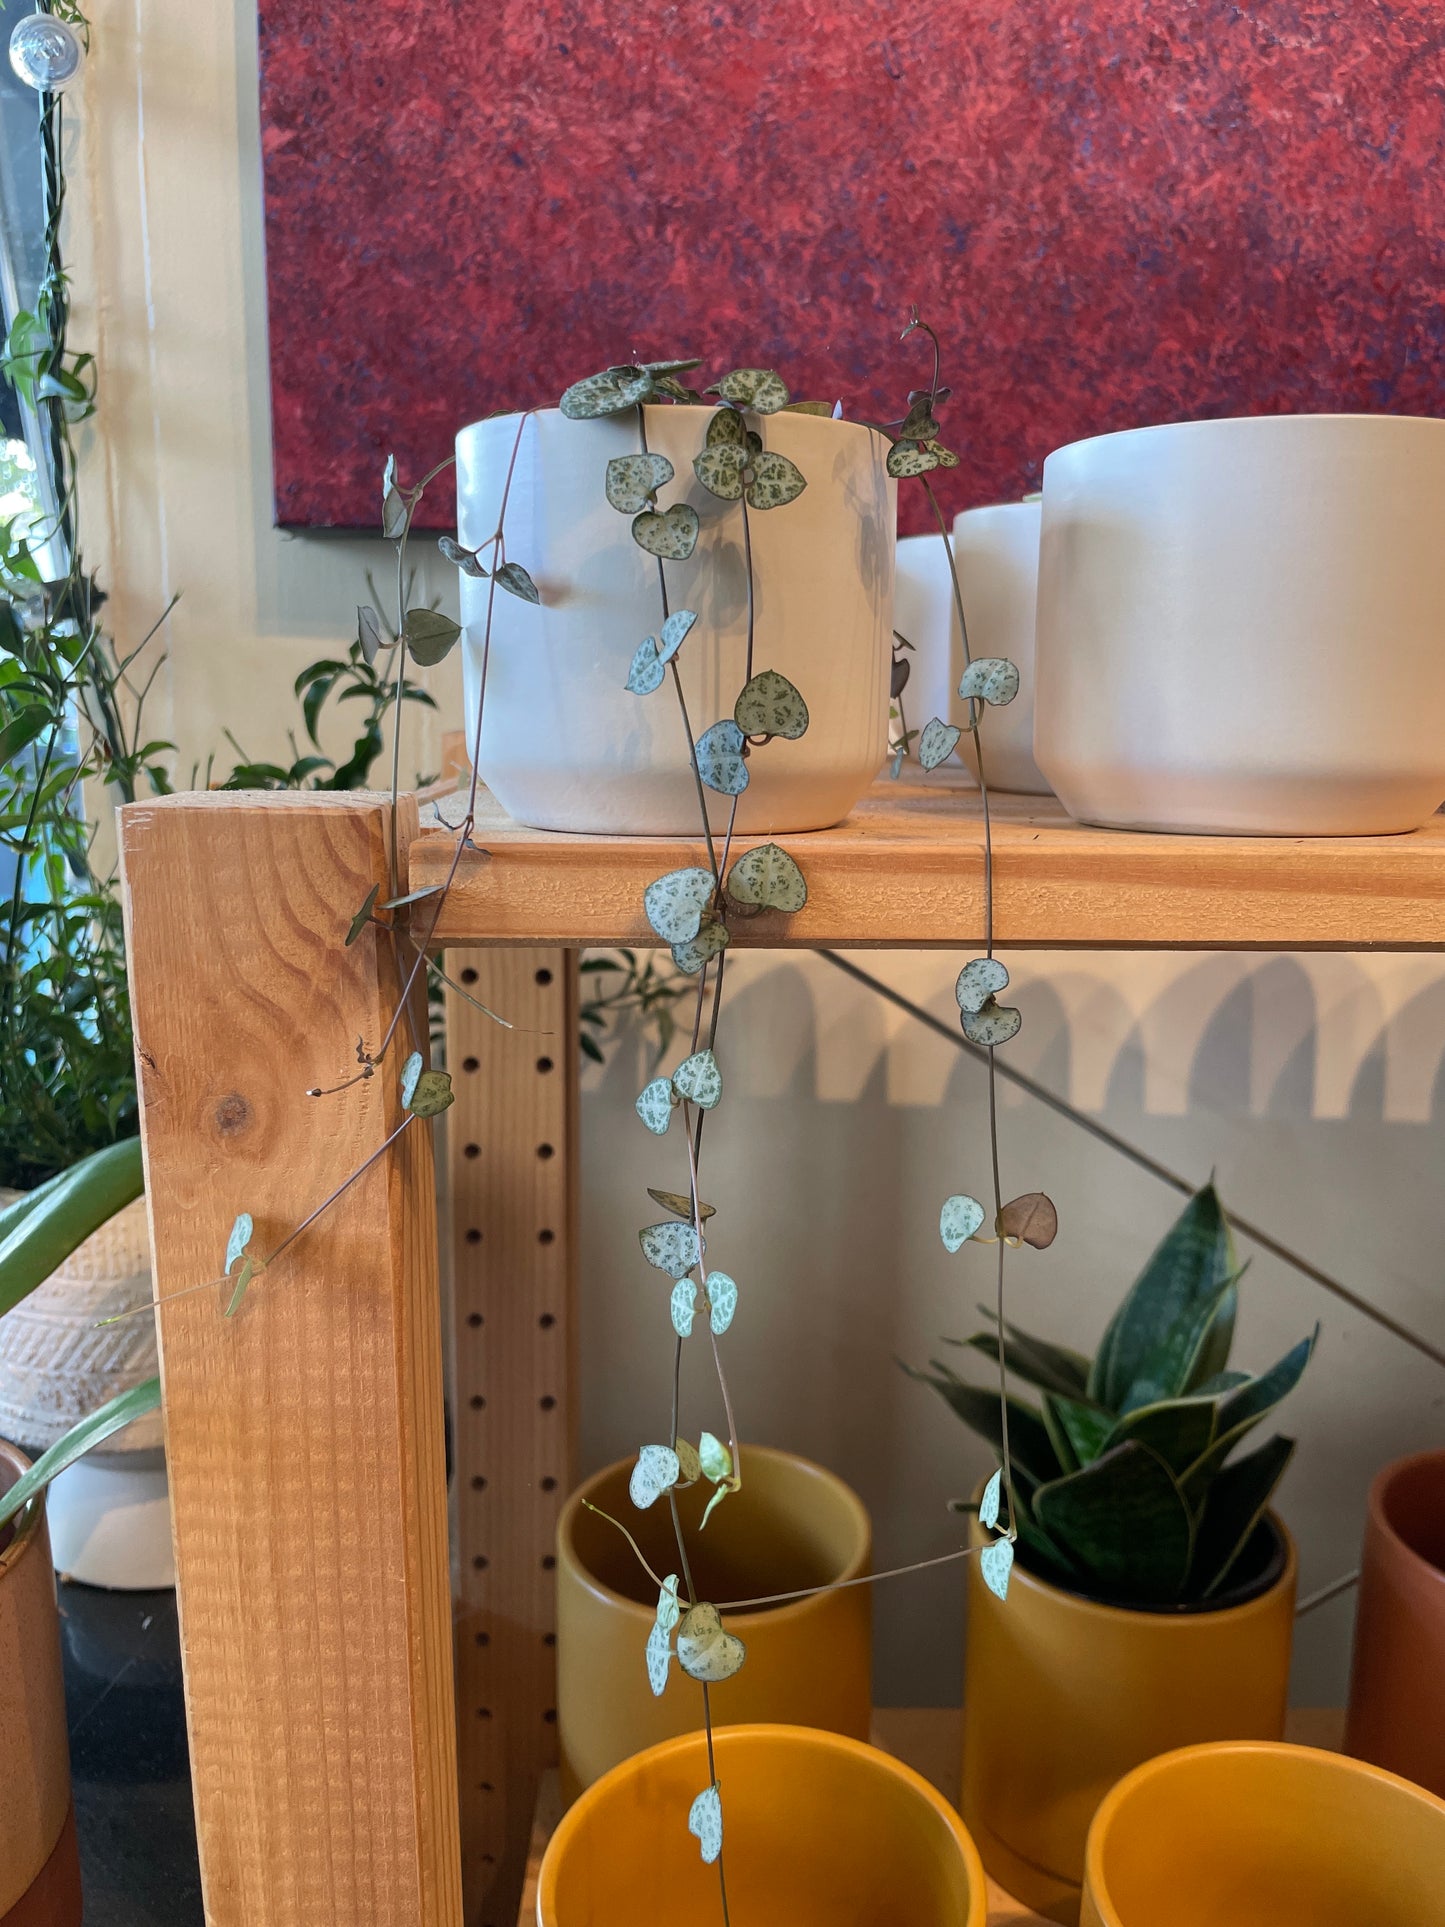 Ceropegia Woodii (String of Hearts)